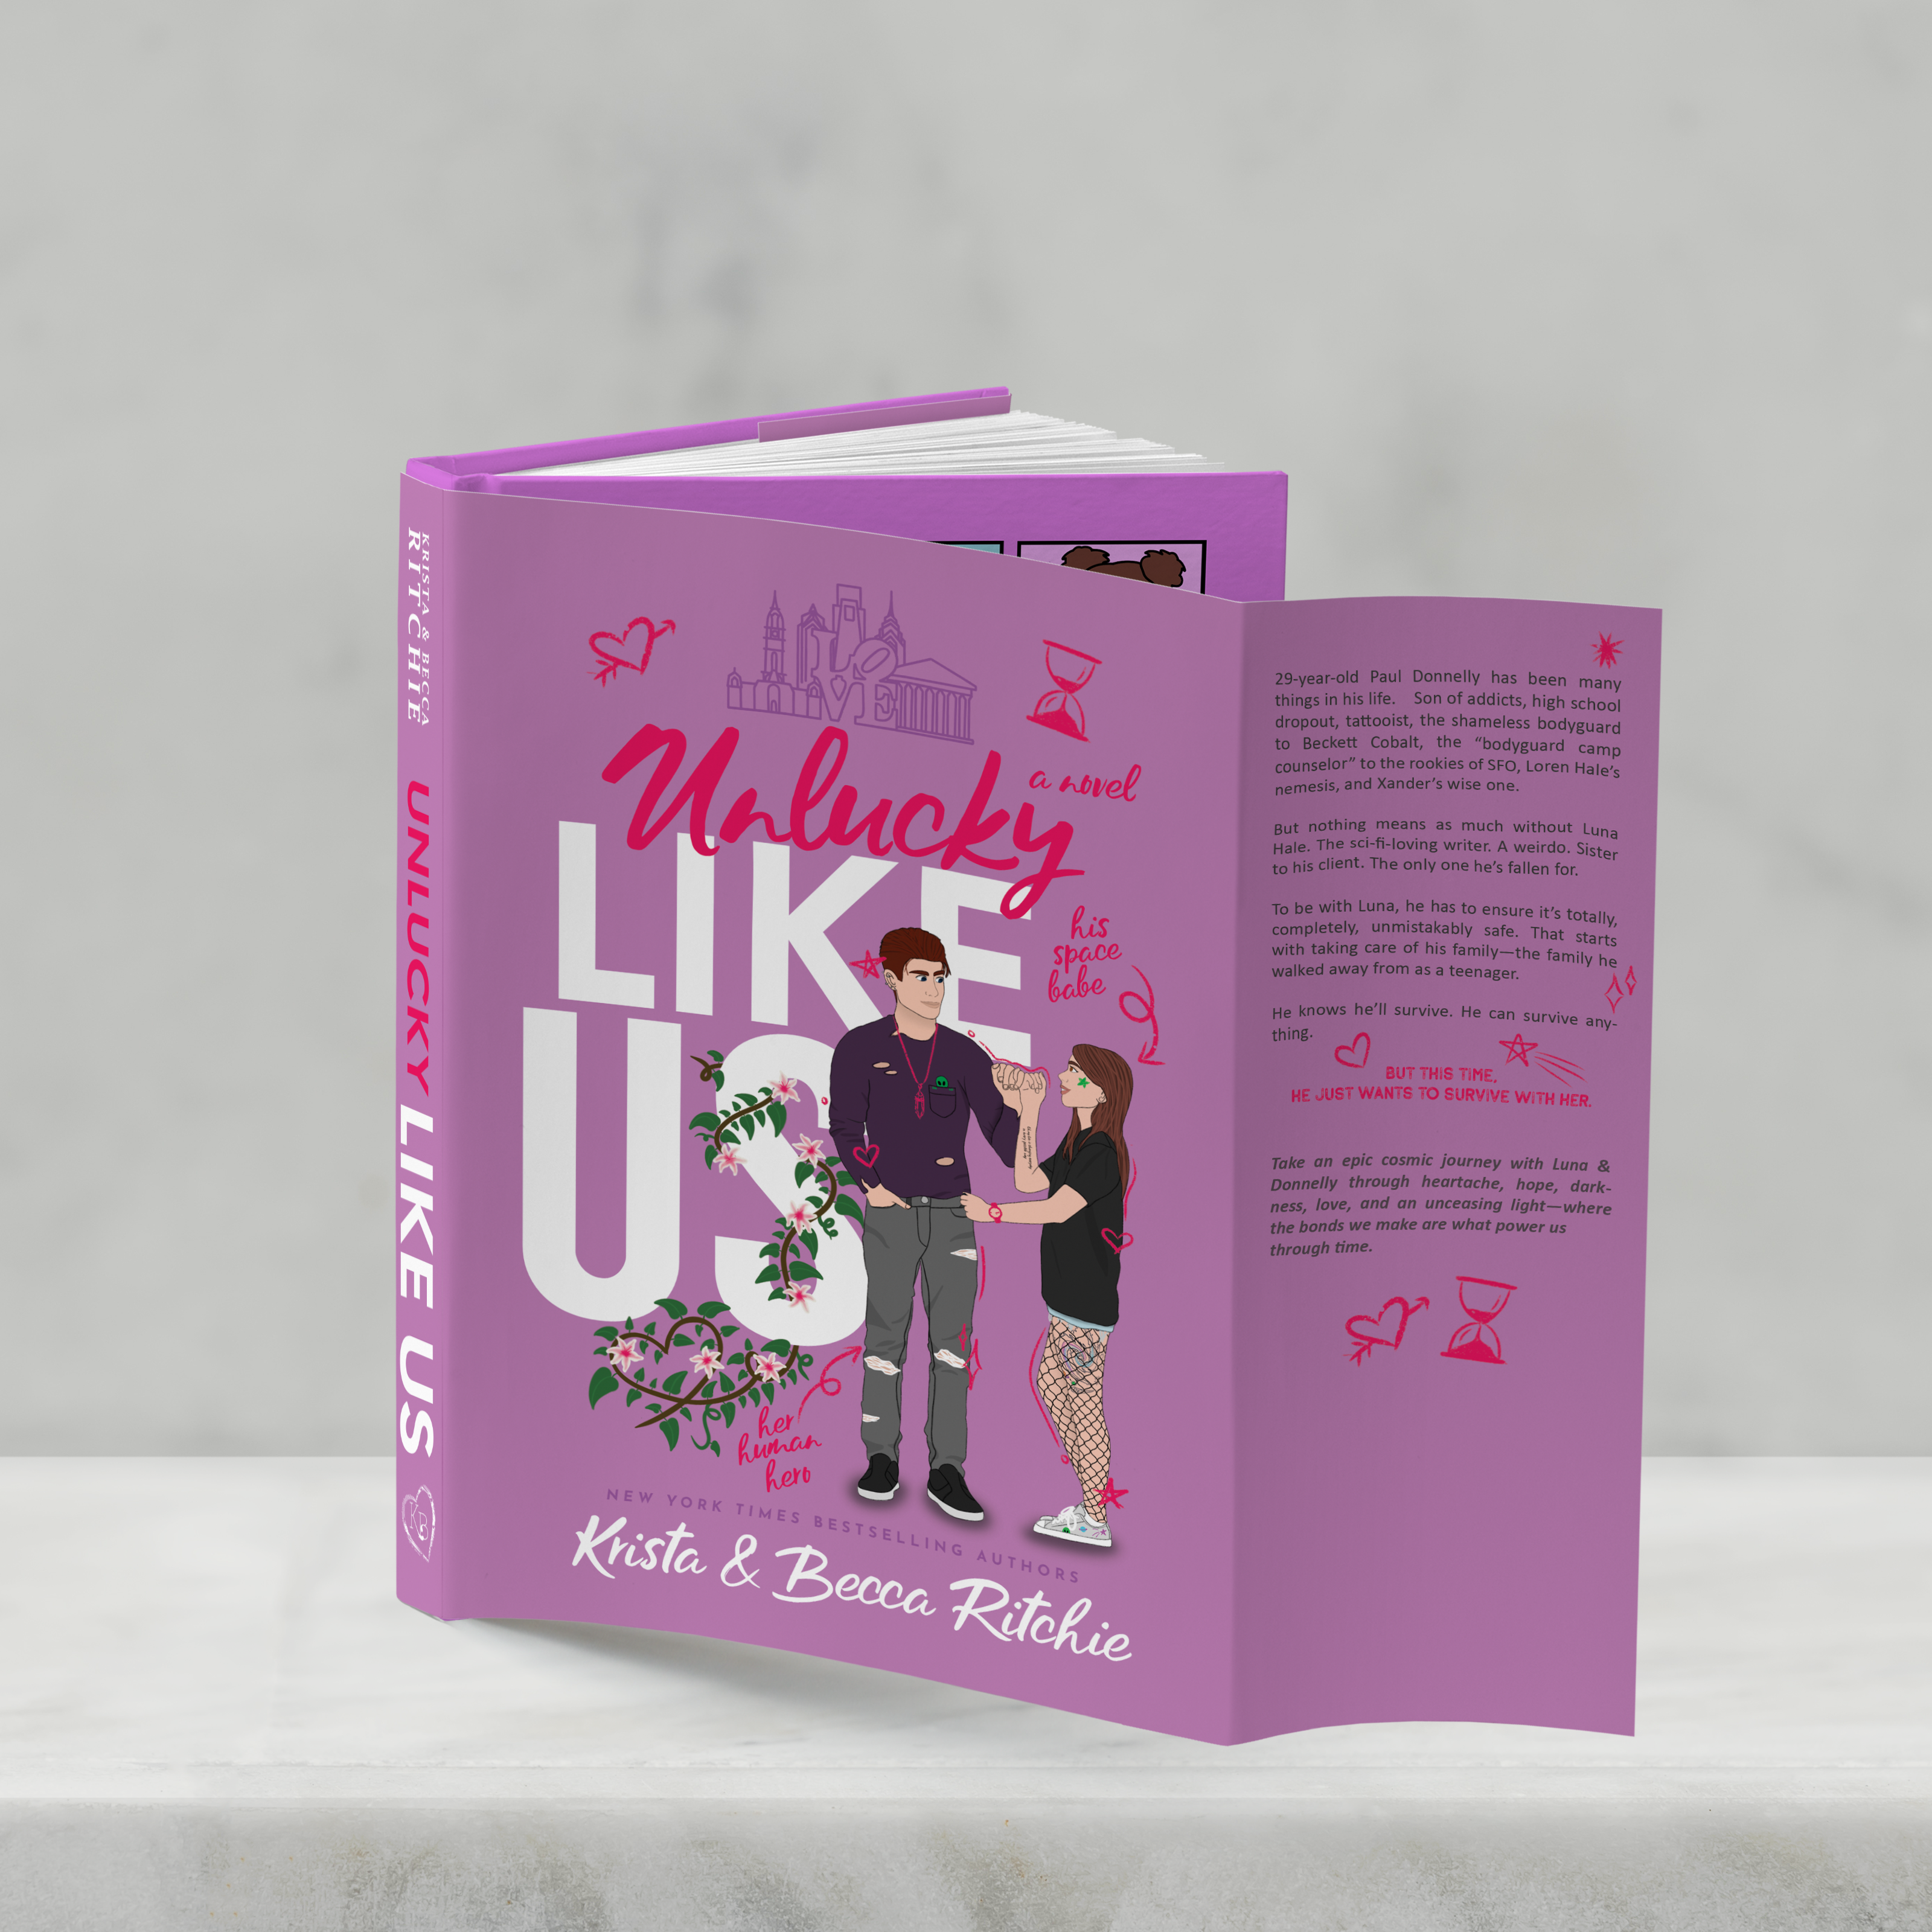 Unlucky Like Us (Special Edition)